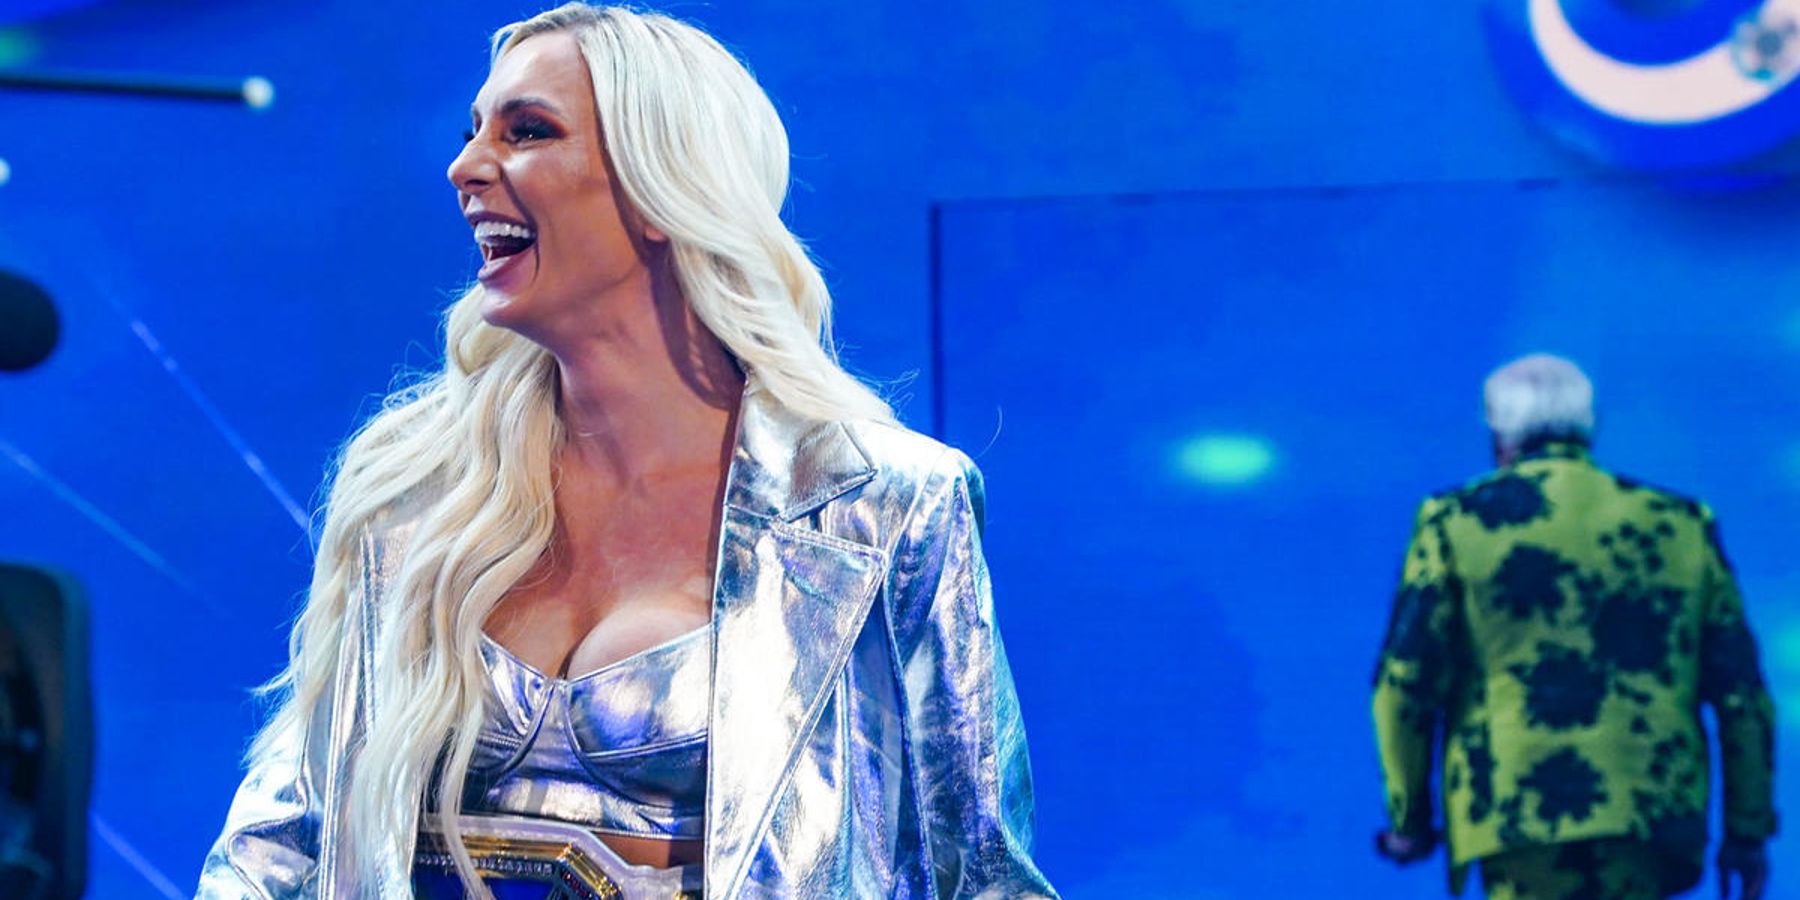 Charlotte Flair makes her way to the ring during WWE's Raw is 30 episode. Her father, Ric Flair, is leaving in the background.